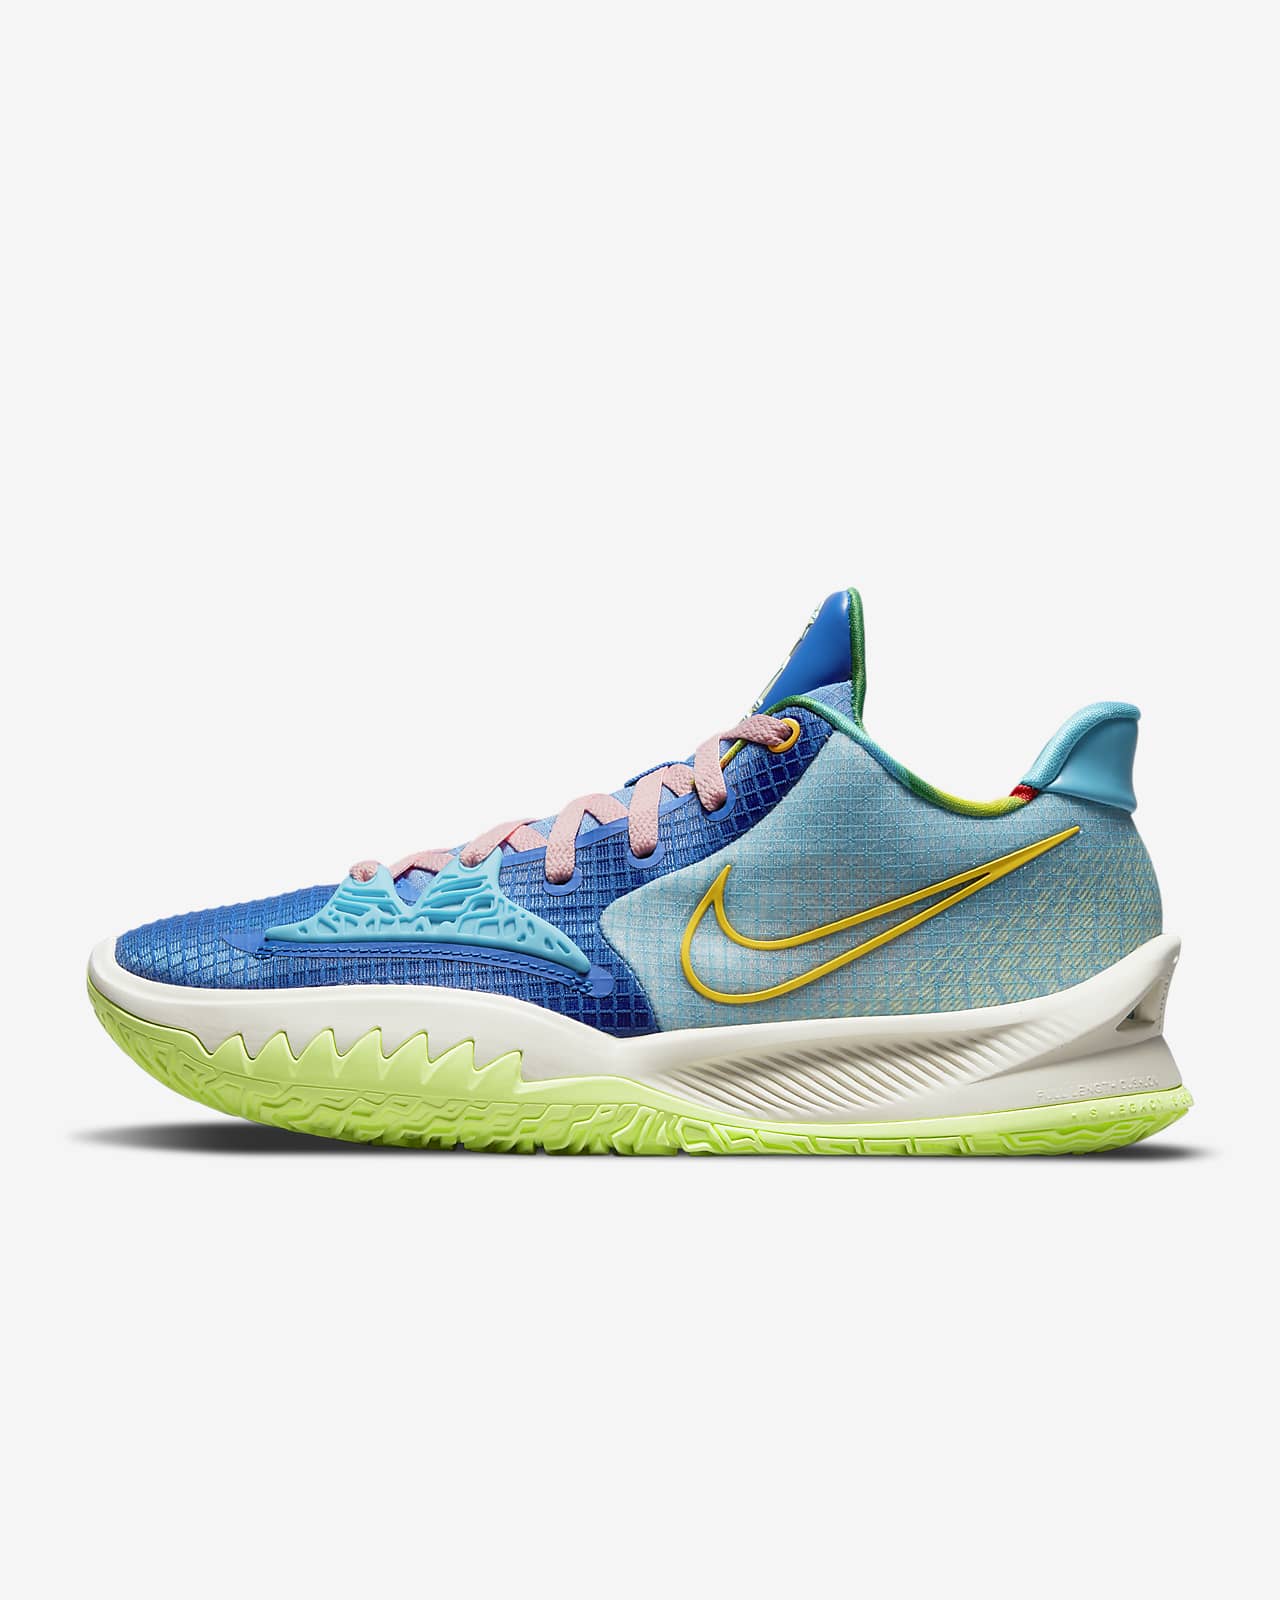 Kyrie Low 4 Basketball Shoes